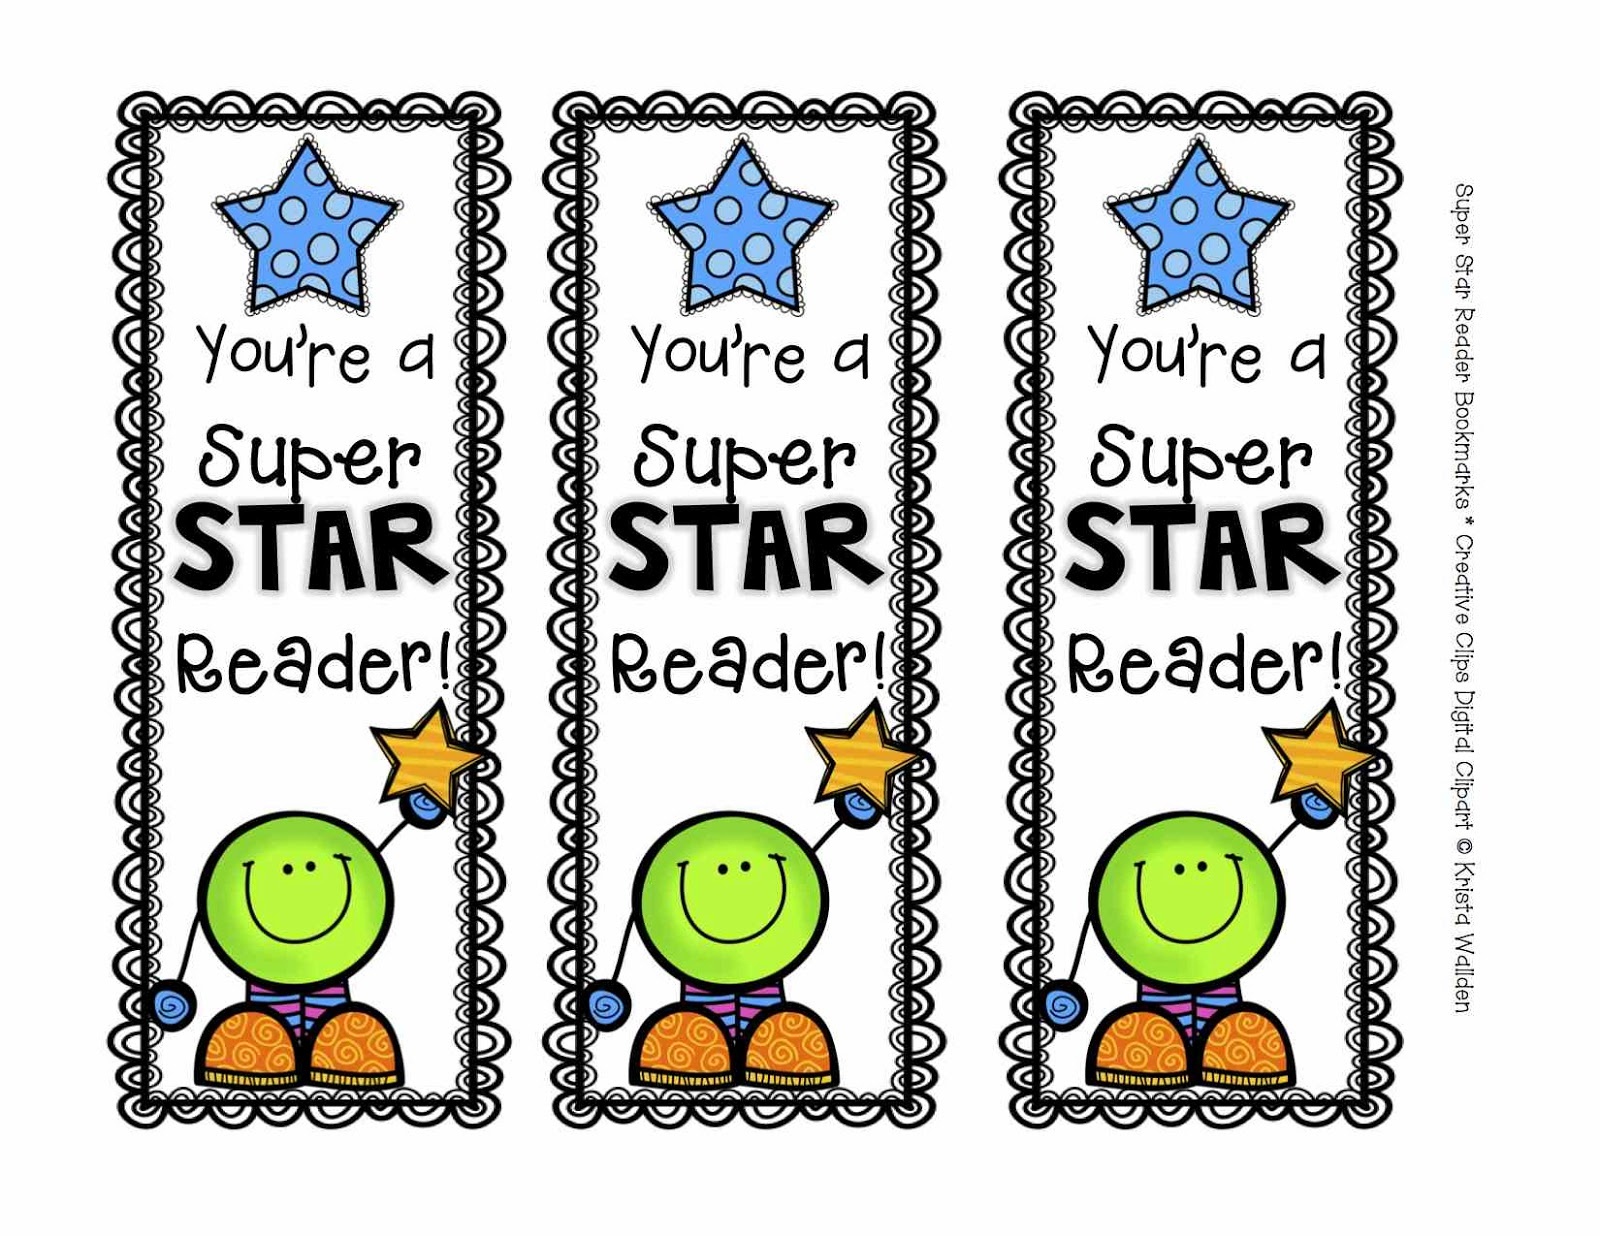 Free Bookmarks Cliparts, Download Free Clip Art, Free Clip Art On - Free Printable Bookmarks For Libraries